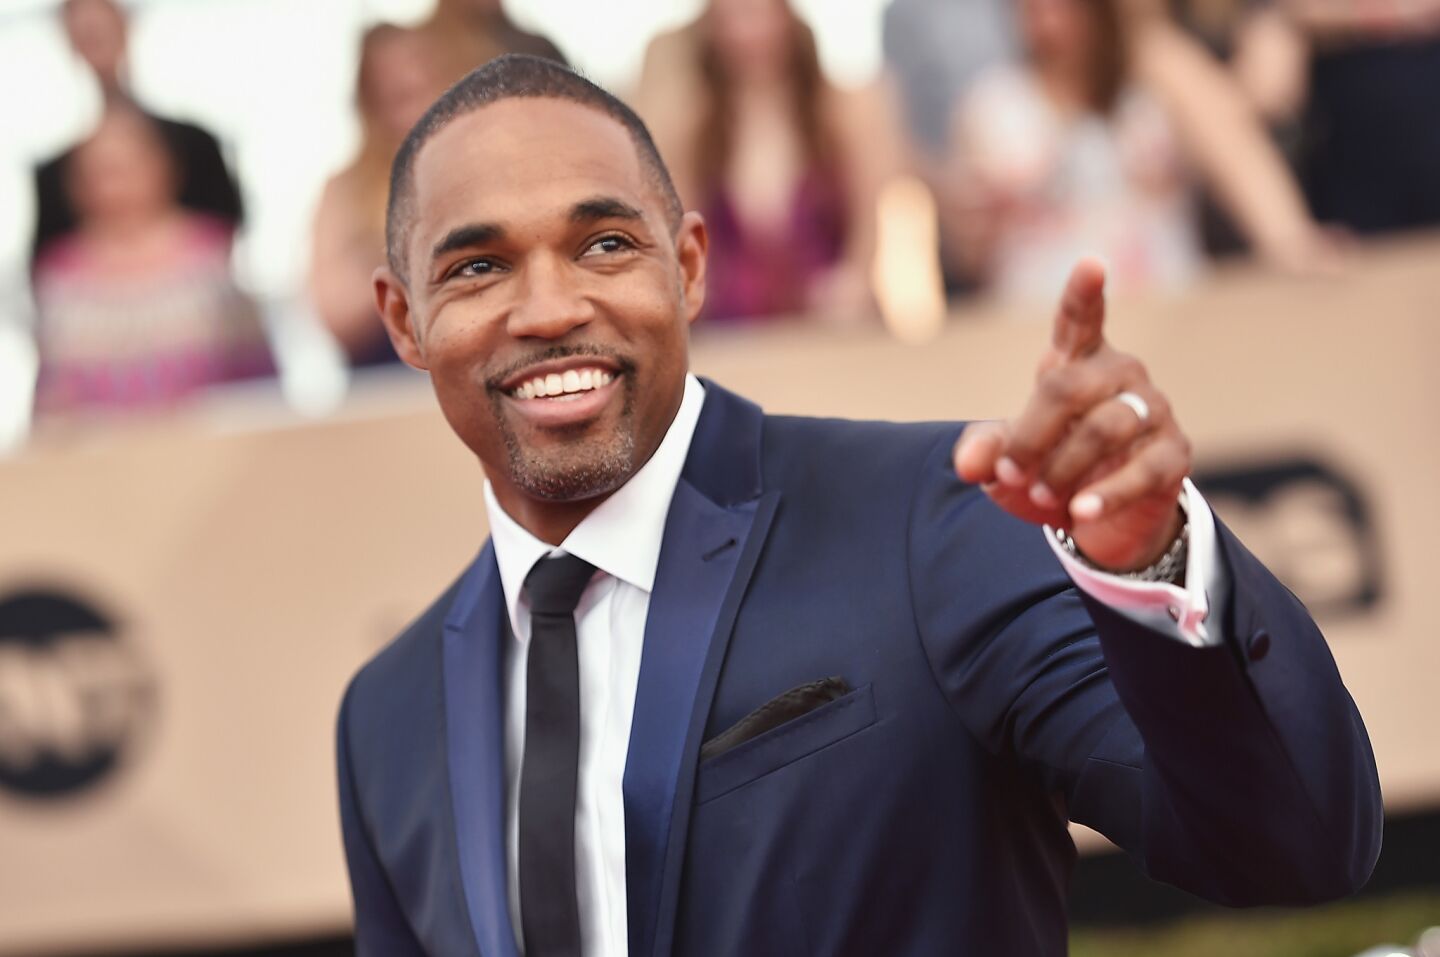 Actor Jason George ("Grey's Anatomy") attends the awards.